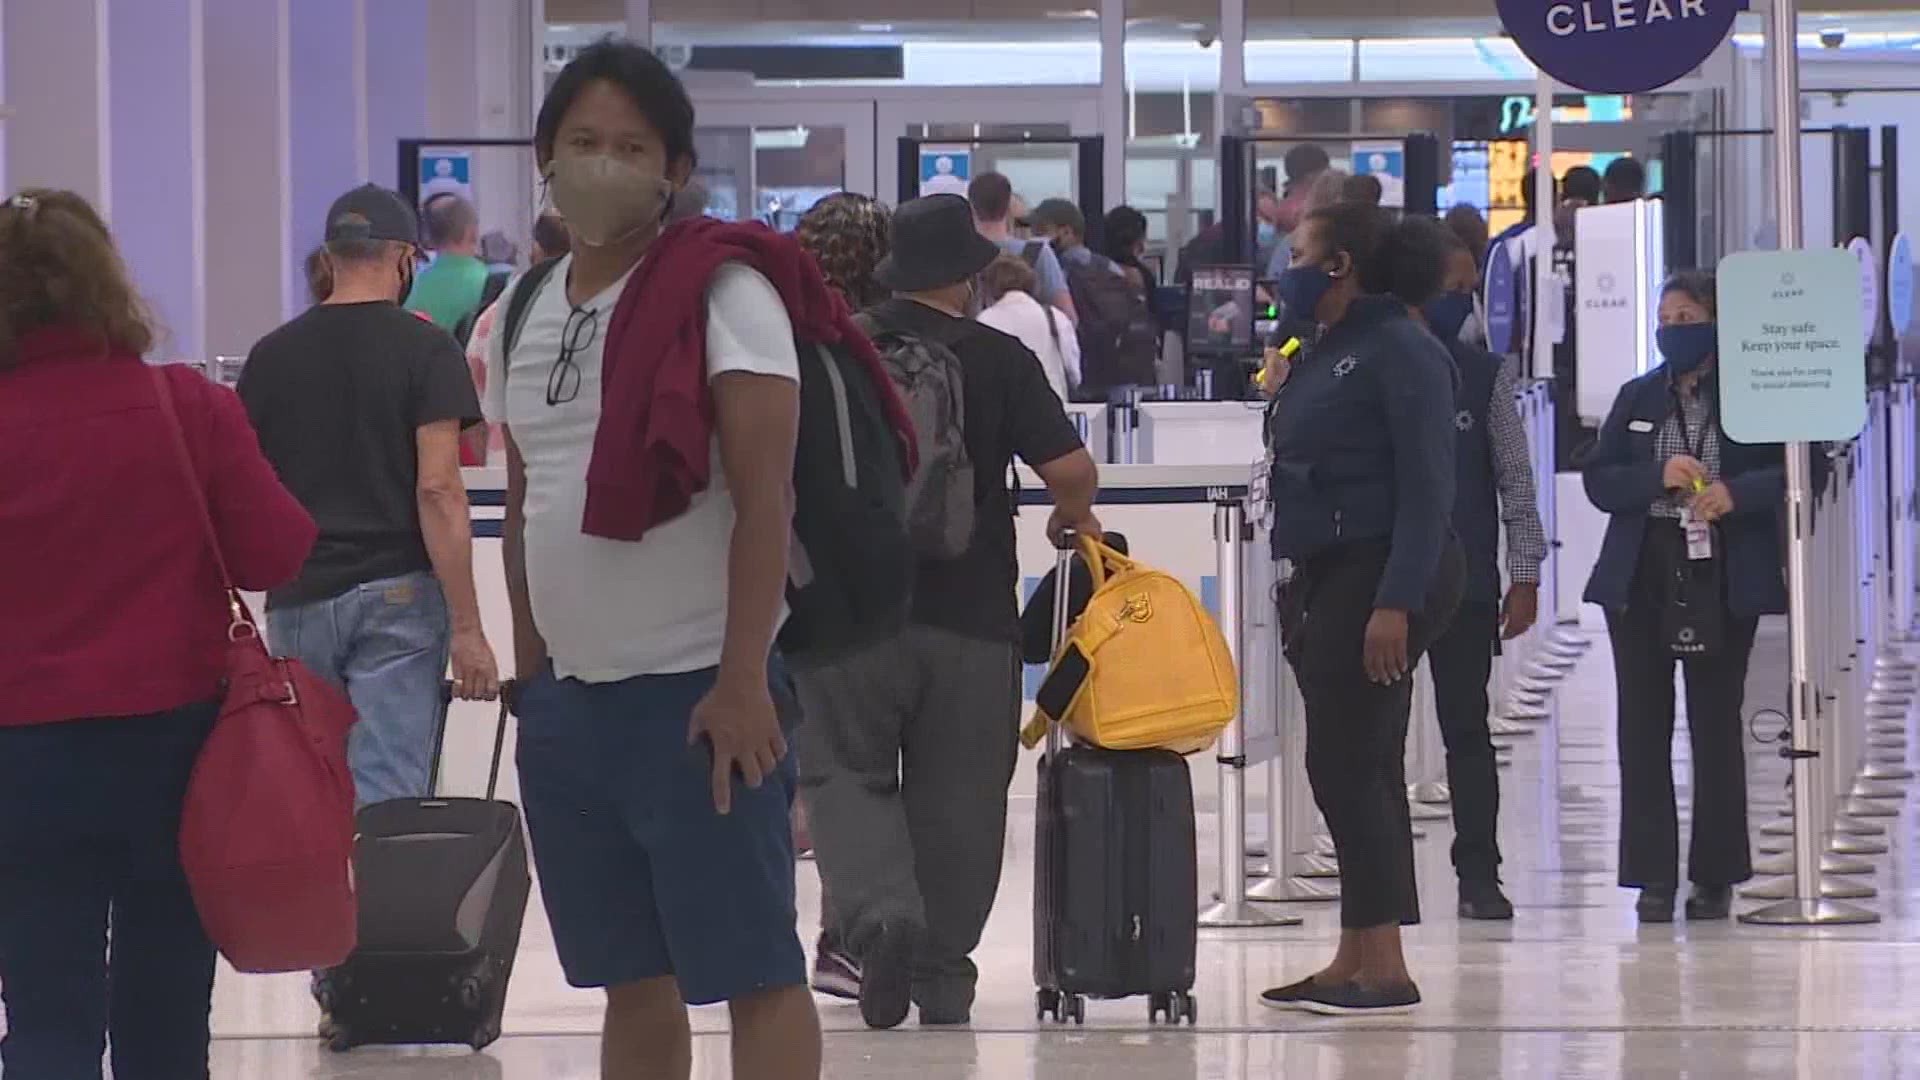 The Houston Airport System expects 800,000 passengers at both Bush and Hobby airports.